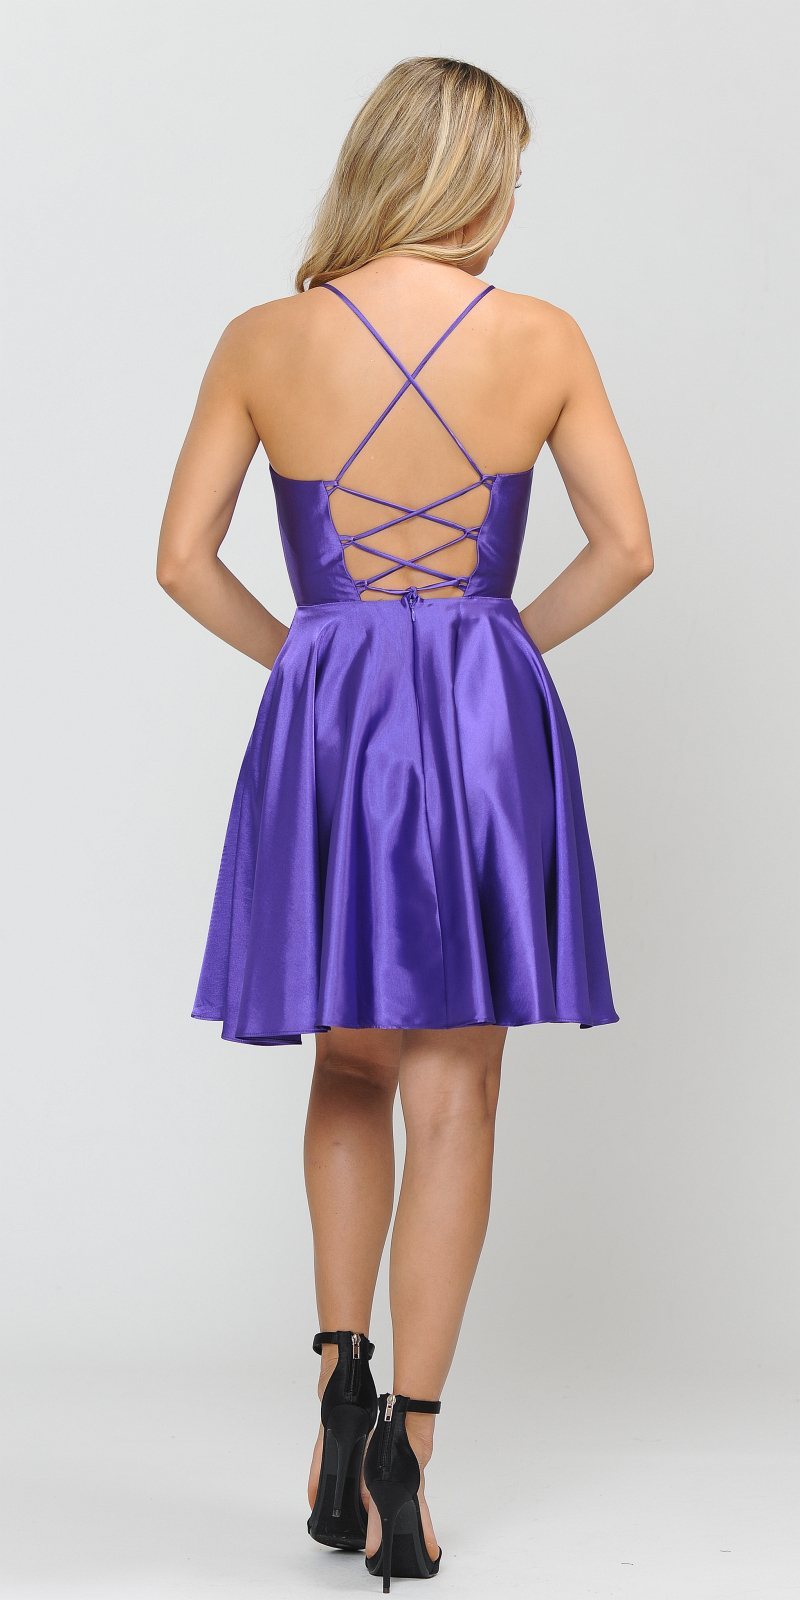 Poly USA 8542 Romper Style Short Homecoming Dress Purple